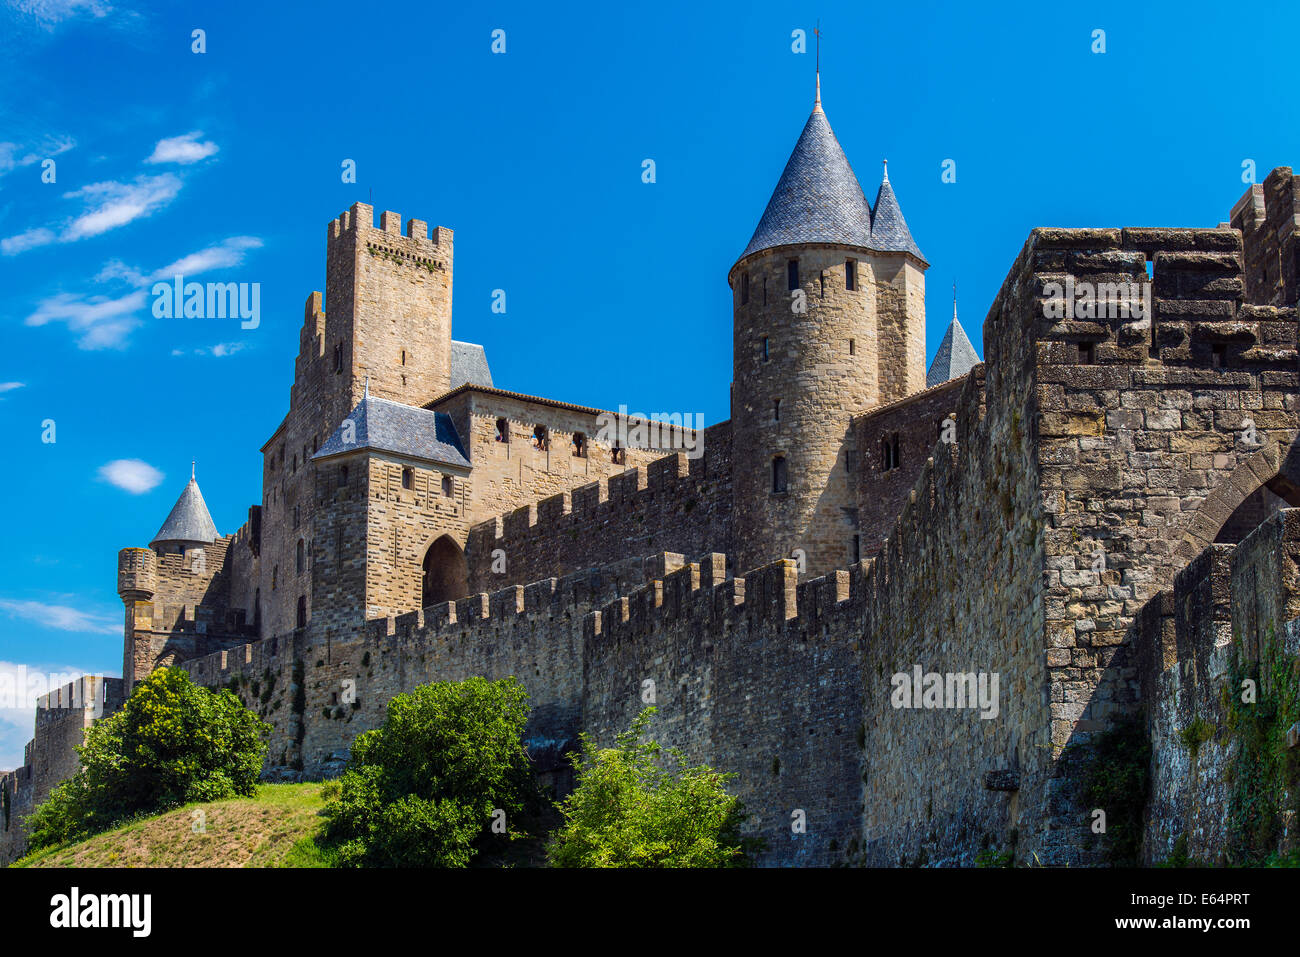 The medieval fortified city of Carcassonne, Languedoc-Roussillon, France Stock Photo